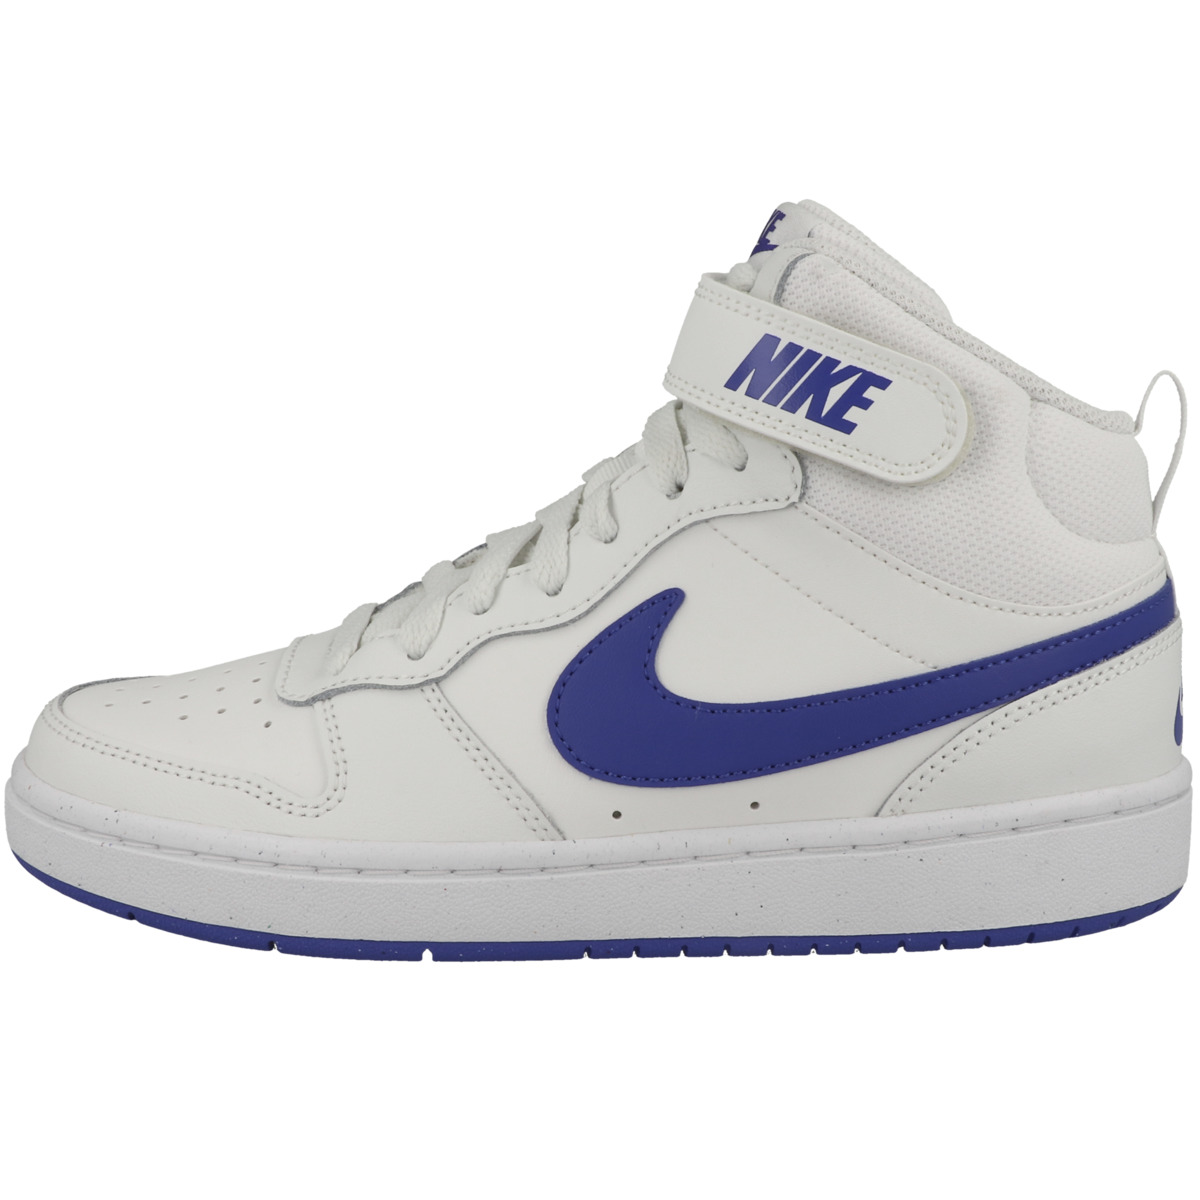 Nike Court Borough Mid 2 (GS) Sneaker mid weiss